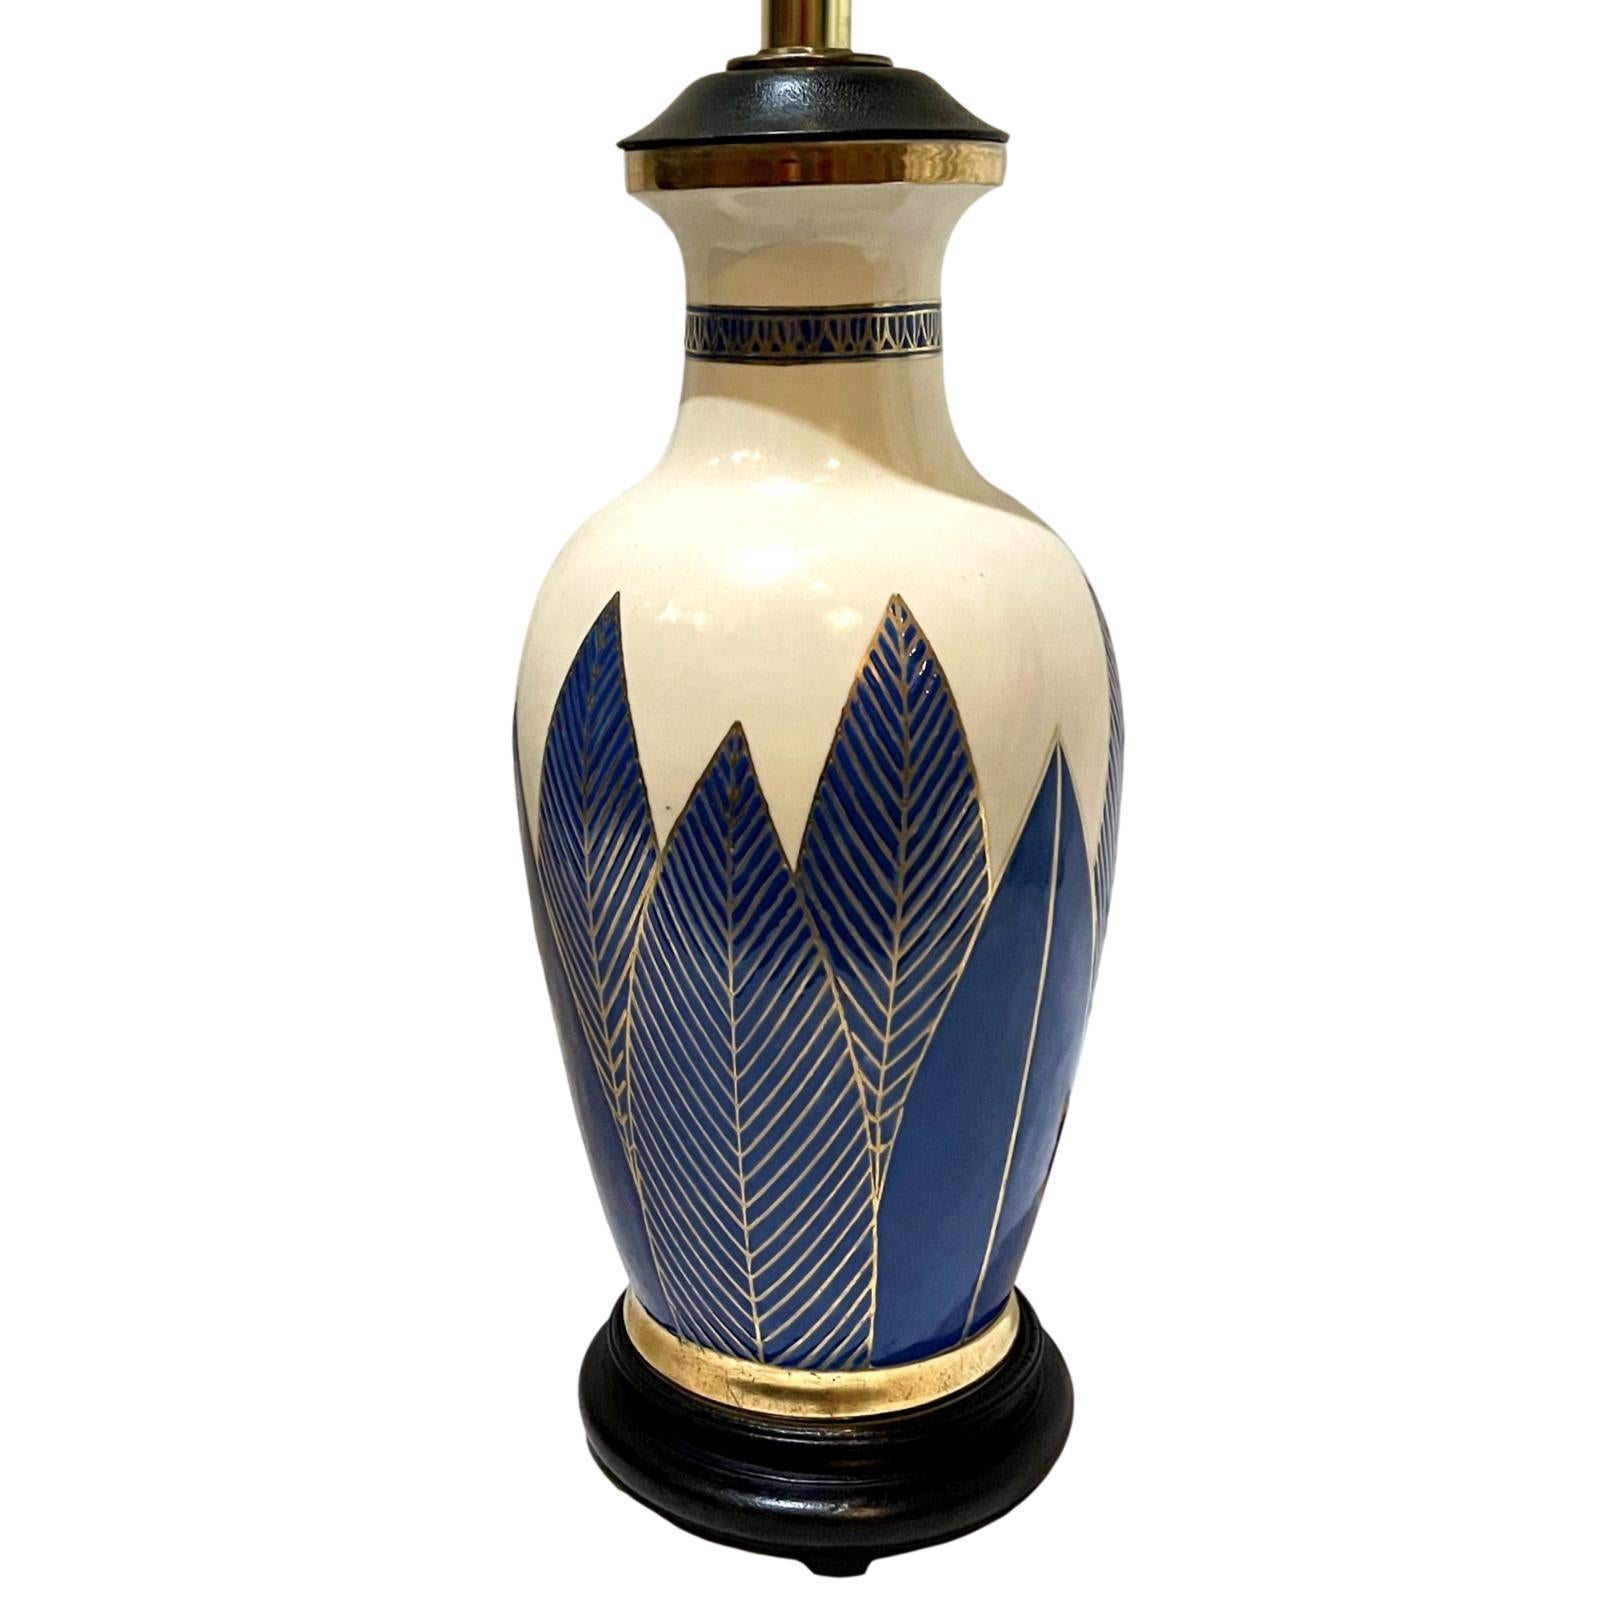 A circa 1950's French what and blue porcelain table lamps with gilt details.

Measurements:
Height of body: 16”
Diameter: 6”.